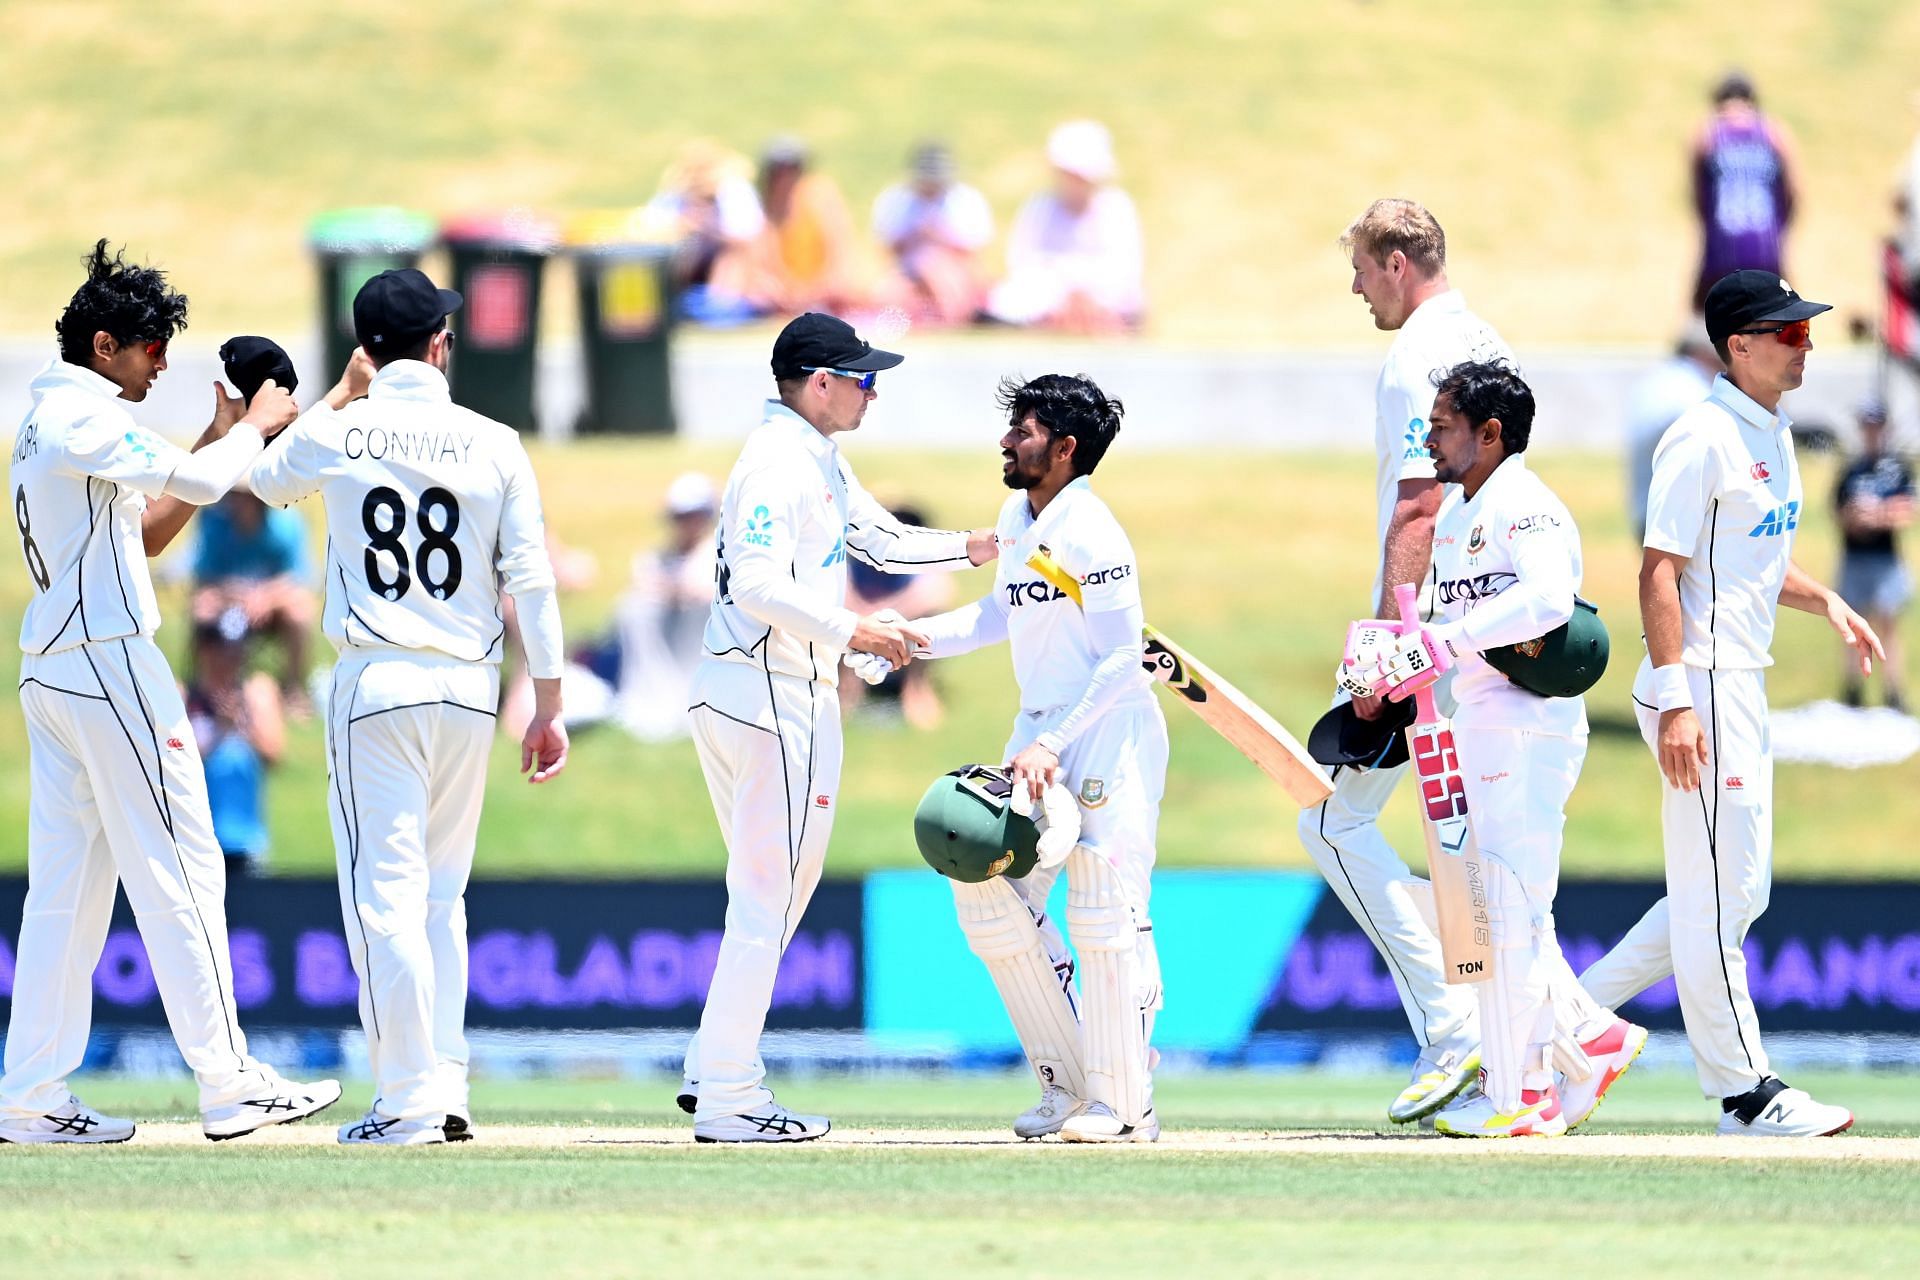 Bangladesh registered their first-ever win in New Zealand on Wednesday, beating the hosts by 8 wickets.